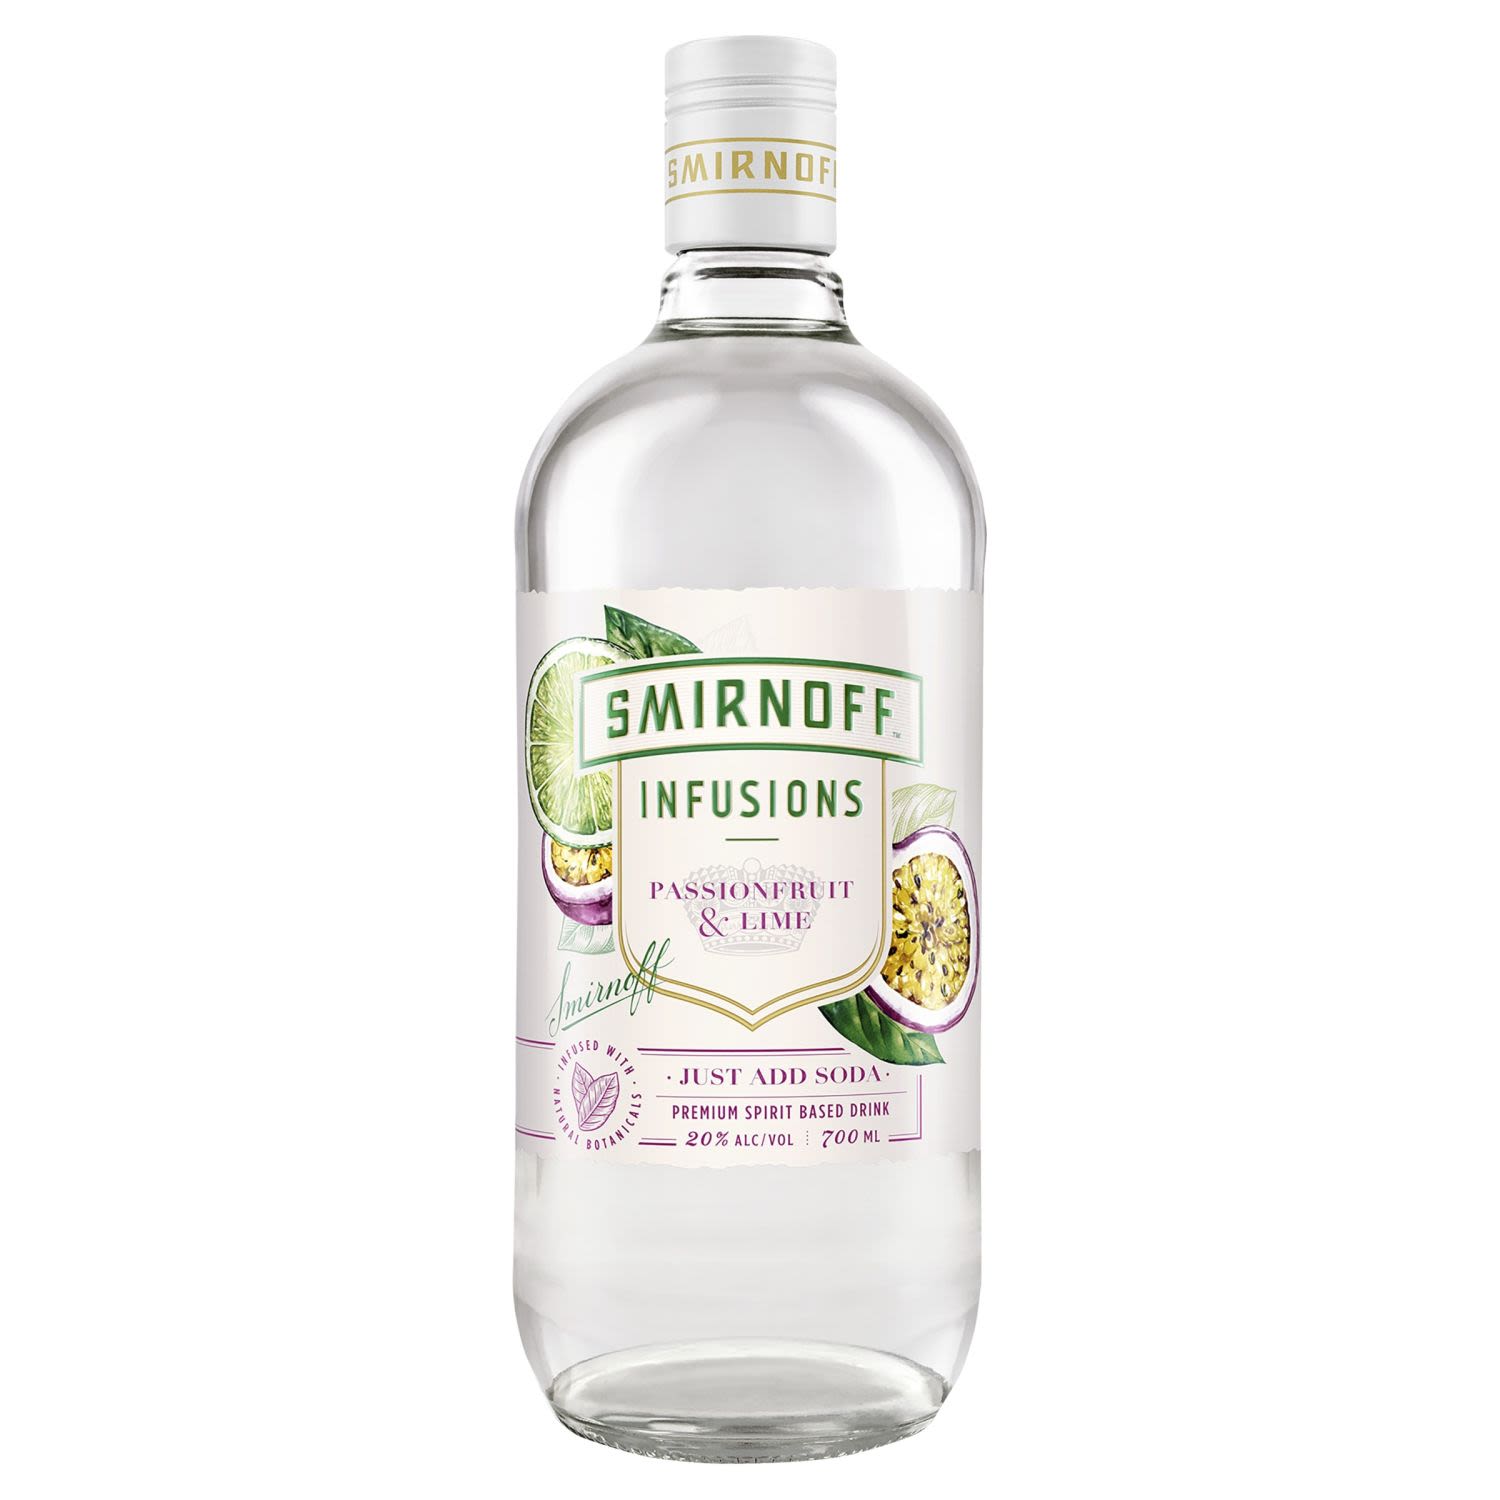 Smirnoff Infusions Passionfruit & Lime 700mL Bottle